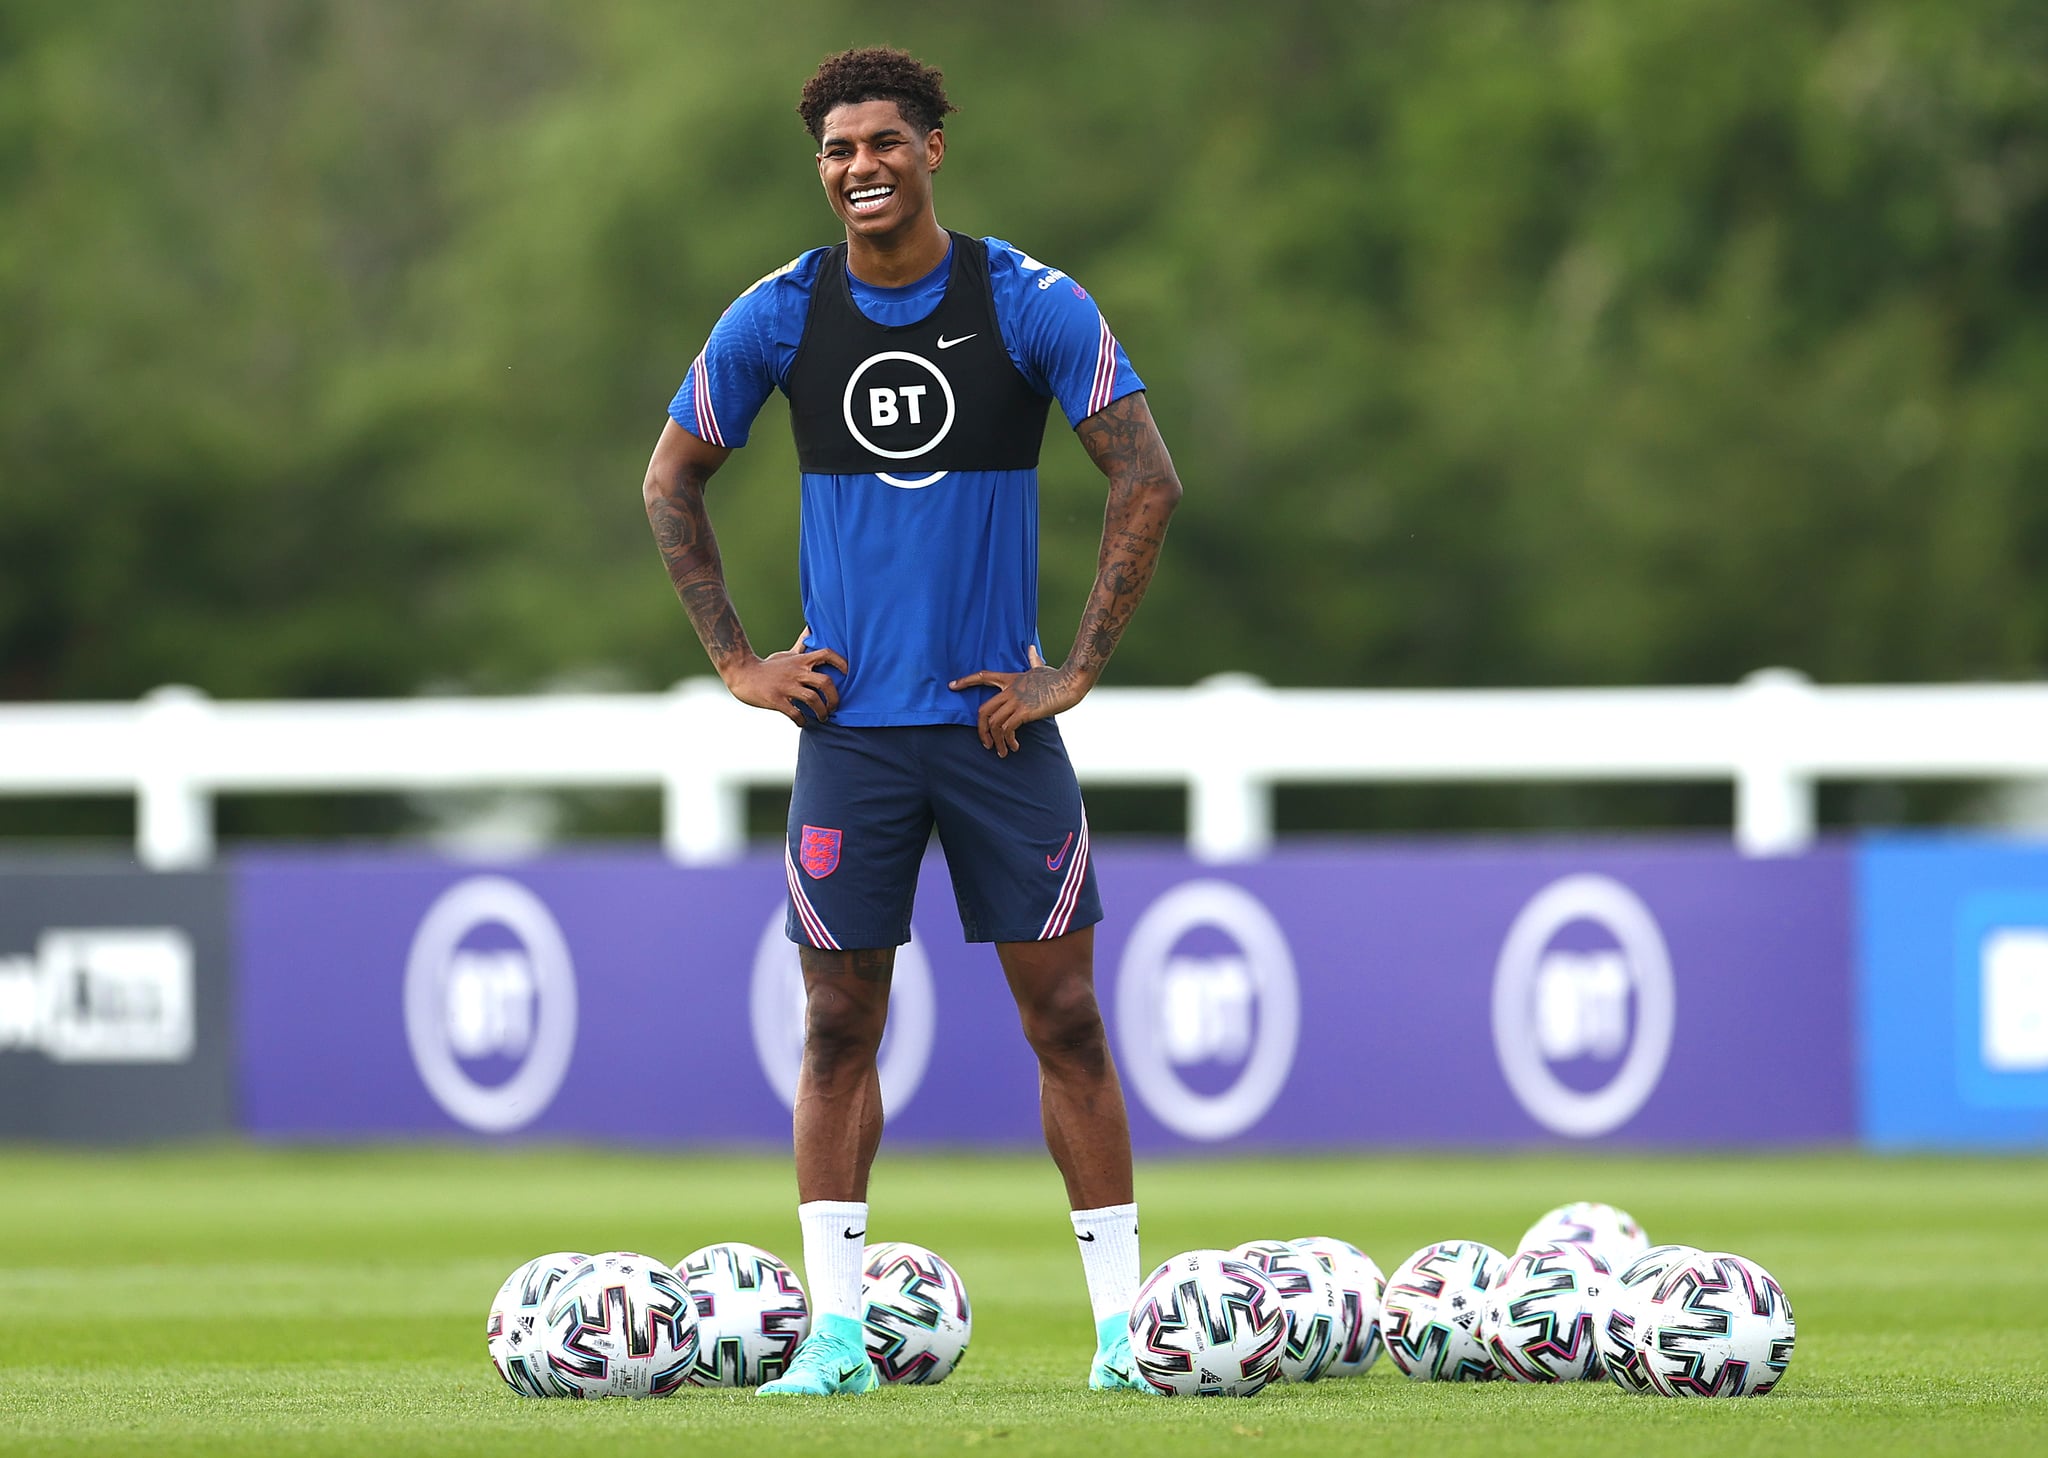 MIDDLESBROUGH, ENGLAND - JUNE 03: Marcus Rashford of England reacts during the England training session on June 03, 2021 in Middlesbrough, England. (Photo by Eddie Keogh - The FA/The FA via Getty Images)